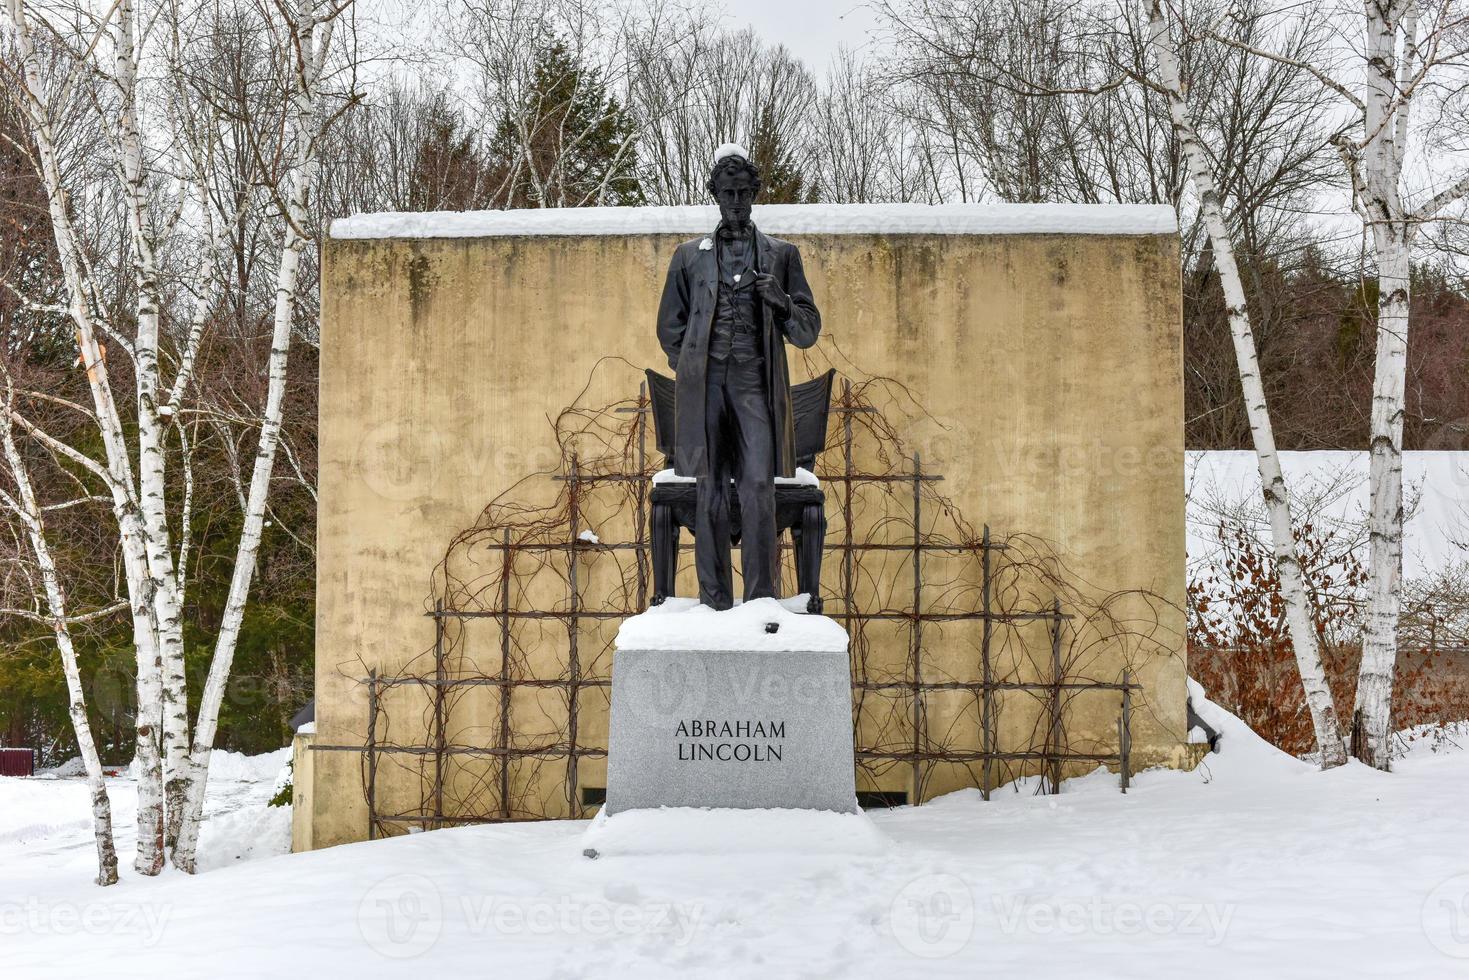 Abraham Lincoln Monument in Saint-Gaudens National Historic Site in New Hampshire. photo